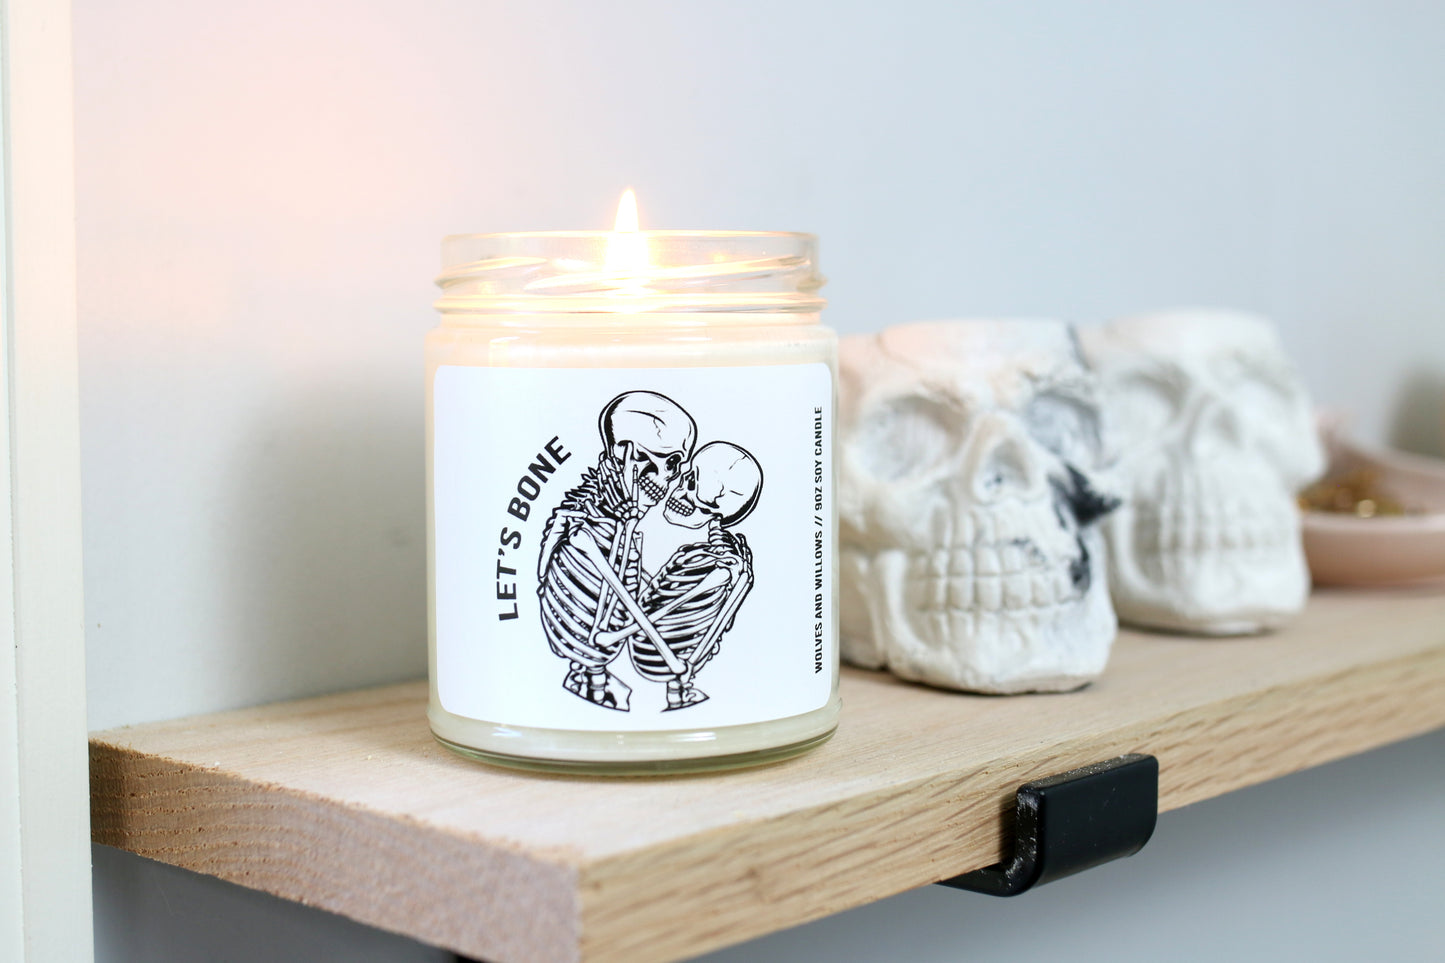 9oz soy candle that reads "let's bone" with two skeletons kissing.